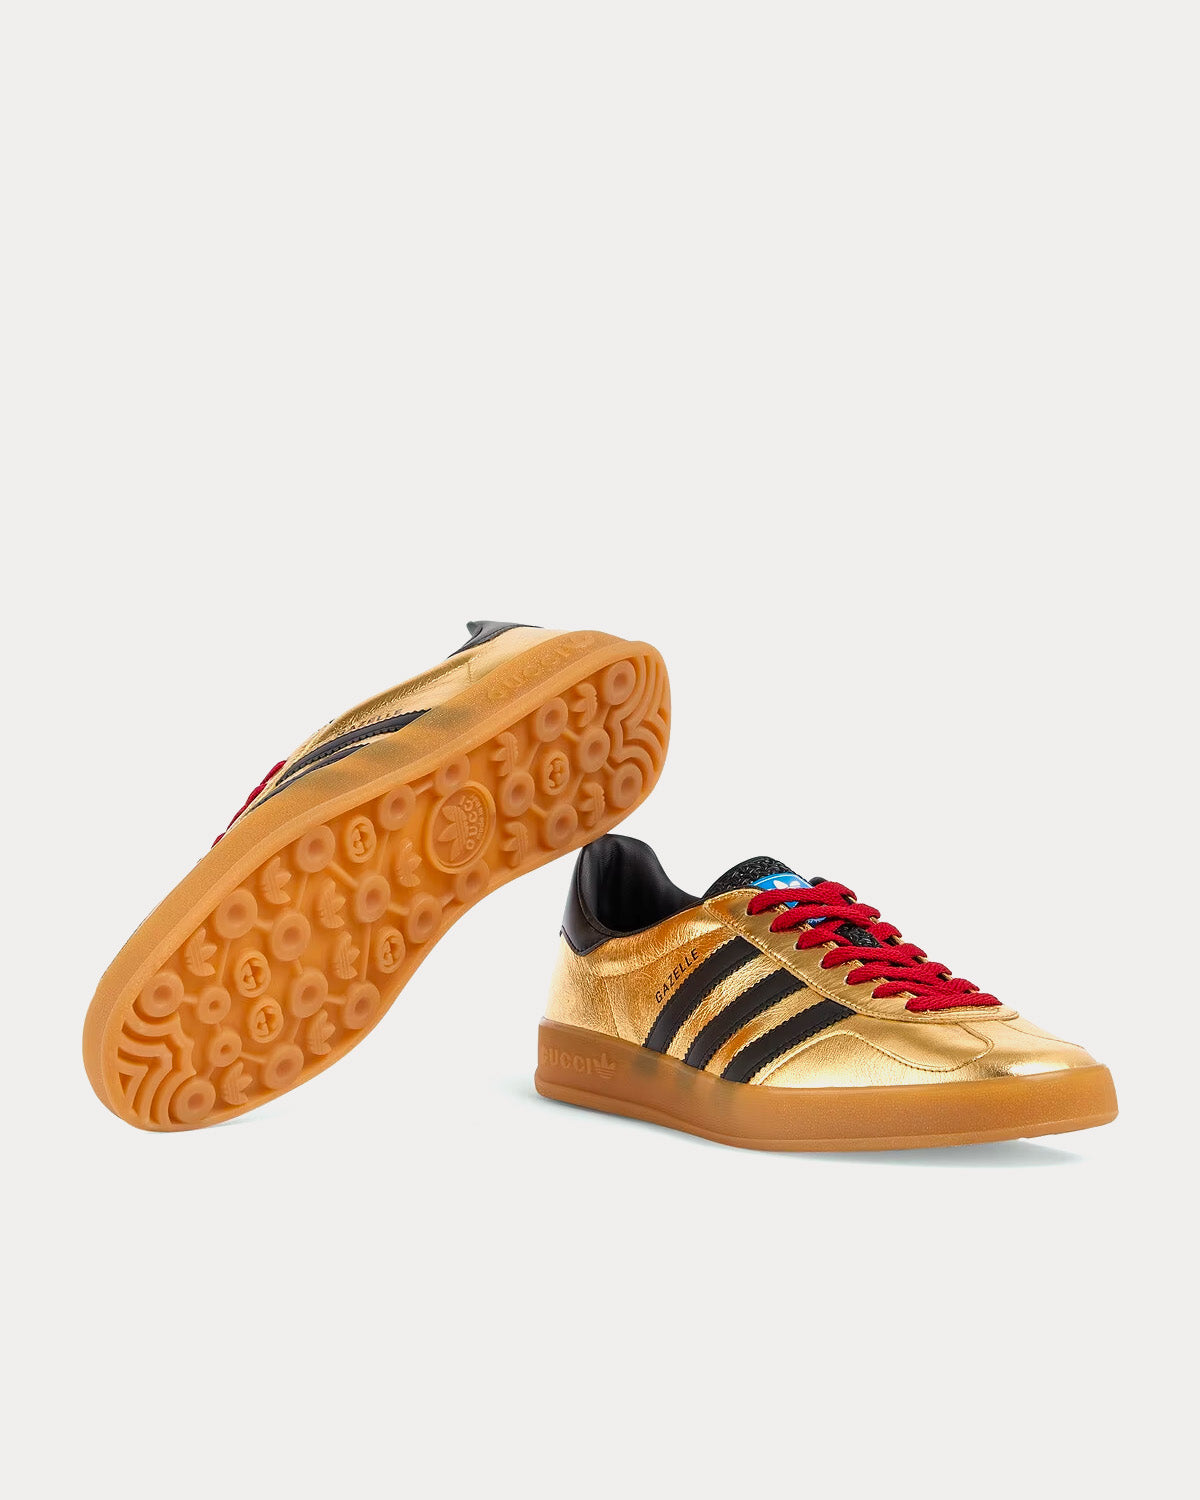 Adidas x Gucci - Gazelle Leather Metallic Gold Low Top Sneakers